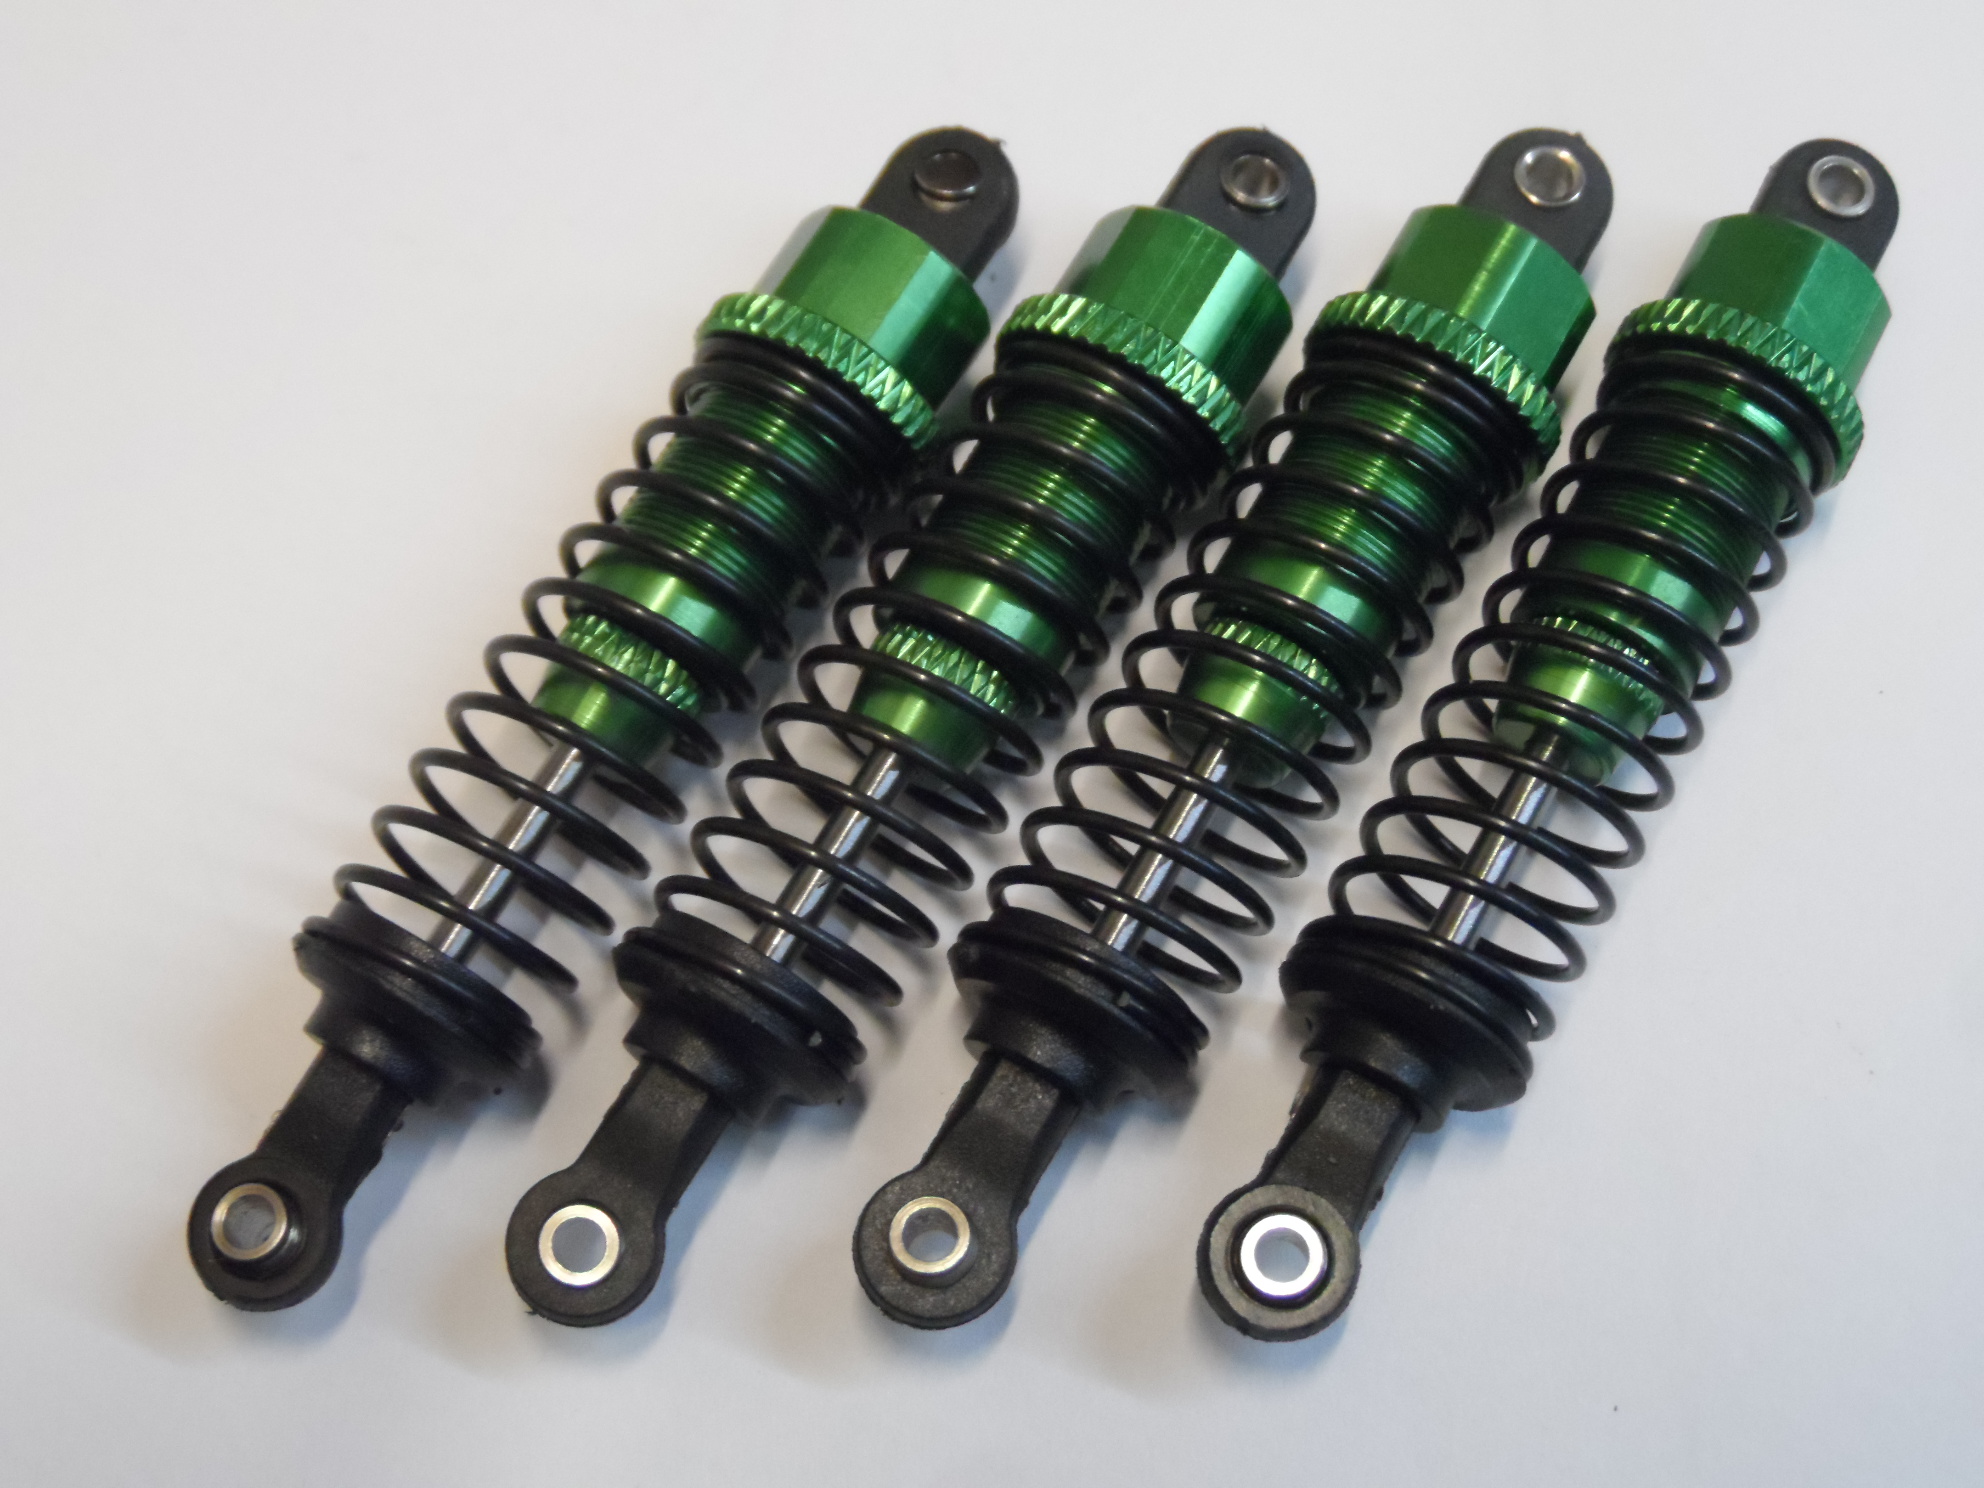 RC Shock Absorbers : New FTX Tracer / HBX 16889 / Blackzon Slyder 